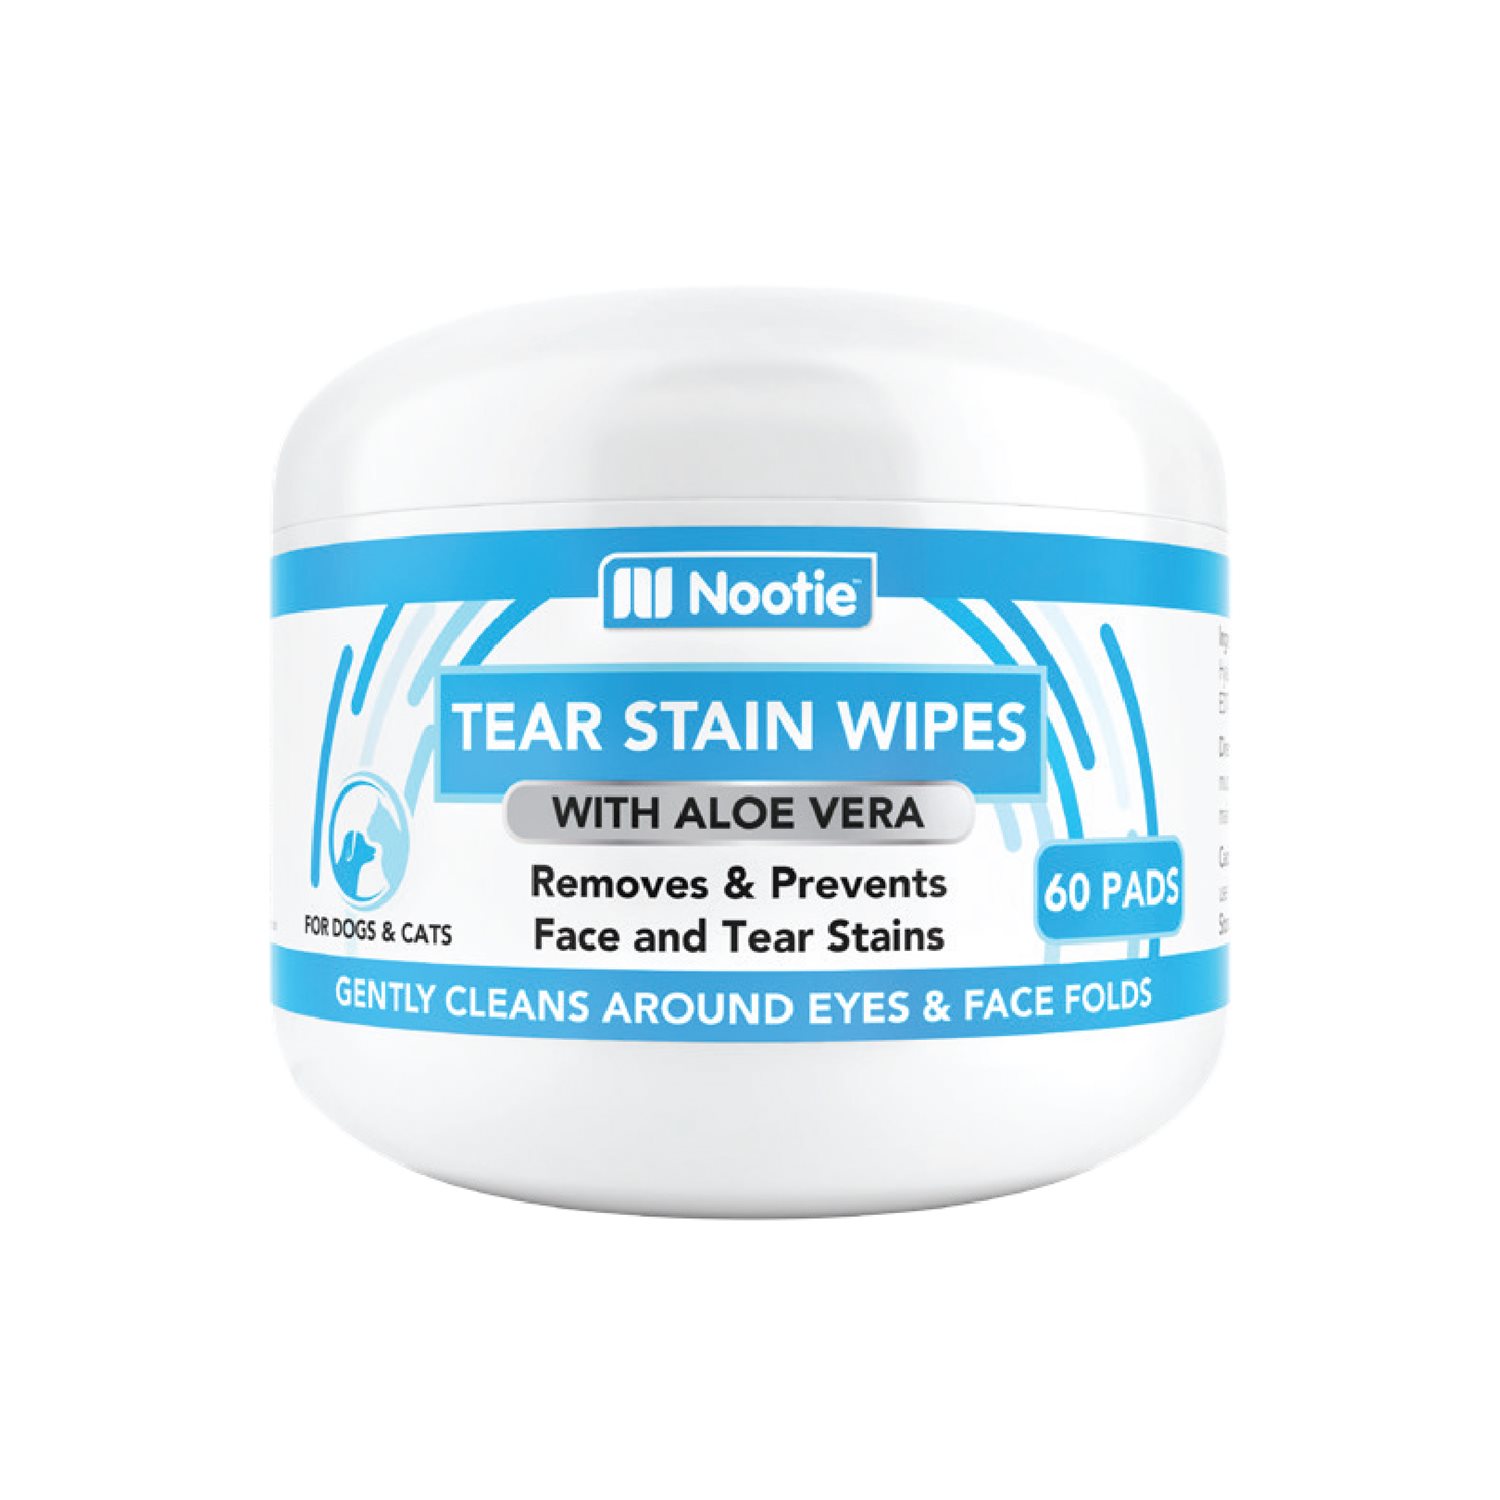 Tear Stain Wipes with Aloe Vera